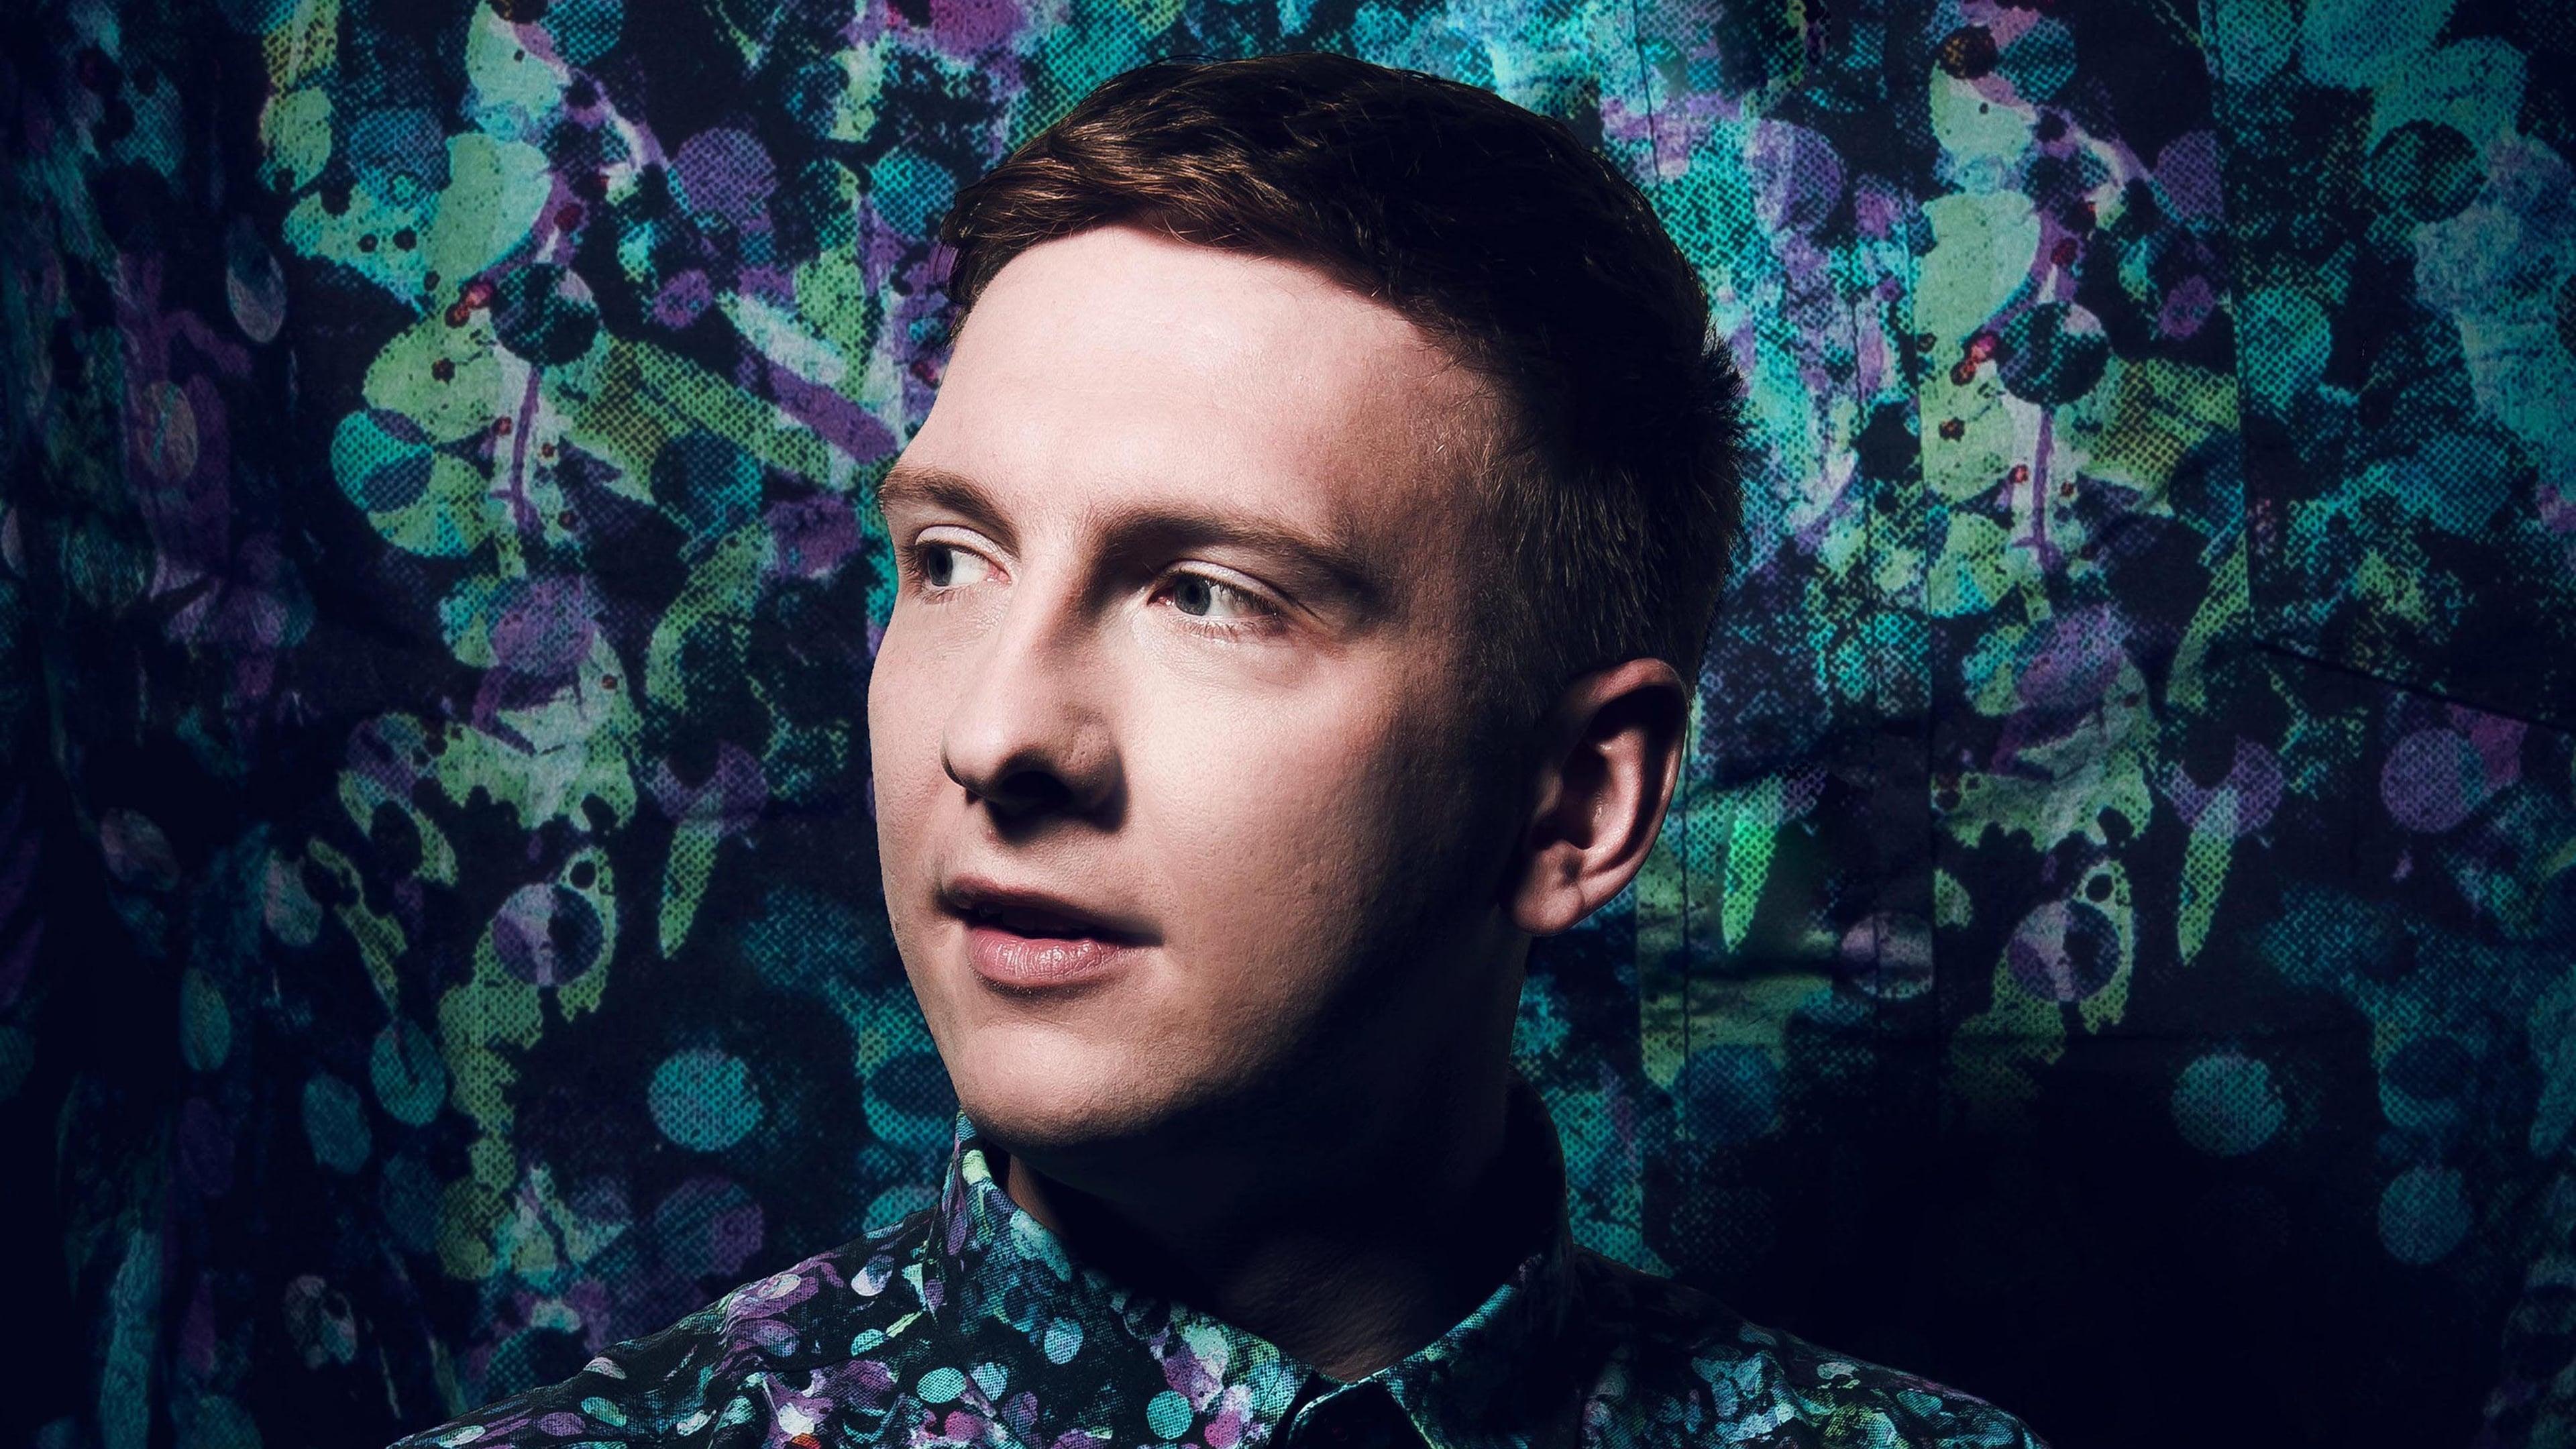 Joe Lycett: I'm About to Lose Control And I Think Joe Lycett, Live backdrop